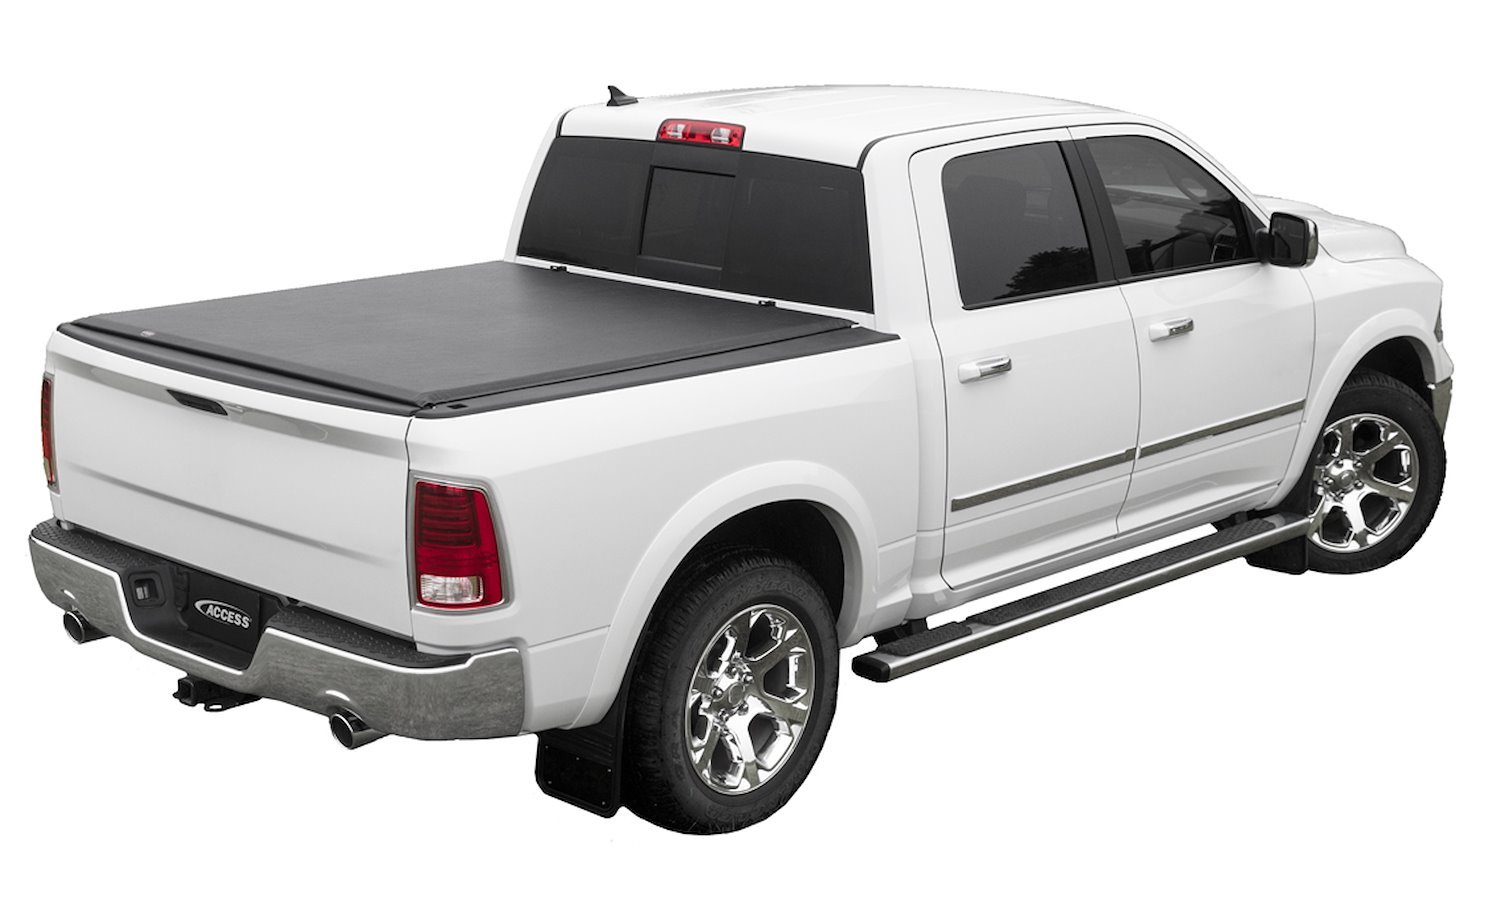 LORADO Roll-Up Tonneau Cover, 2009-2018 Ram 1500, Fits Select Ram Classic, 2010-2018 Ram 2500/3500, with 6 ft. 4 in. Bed